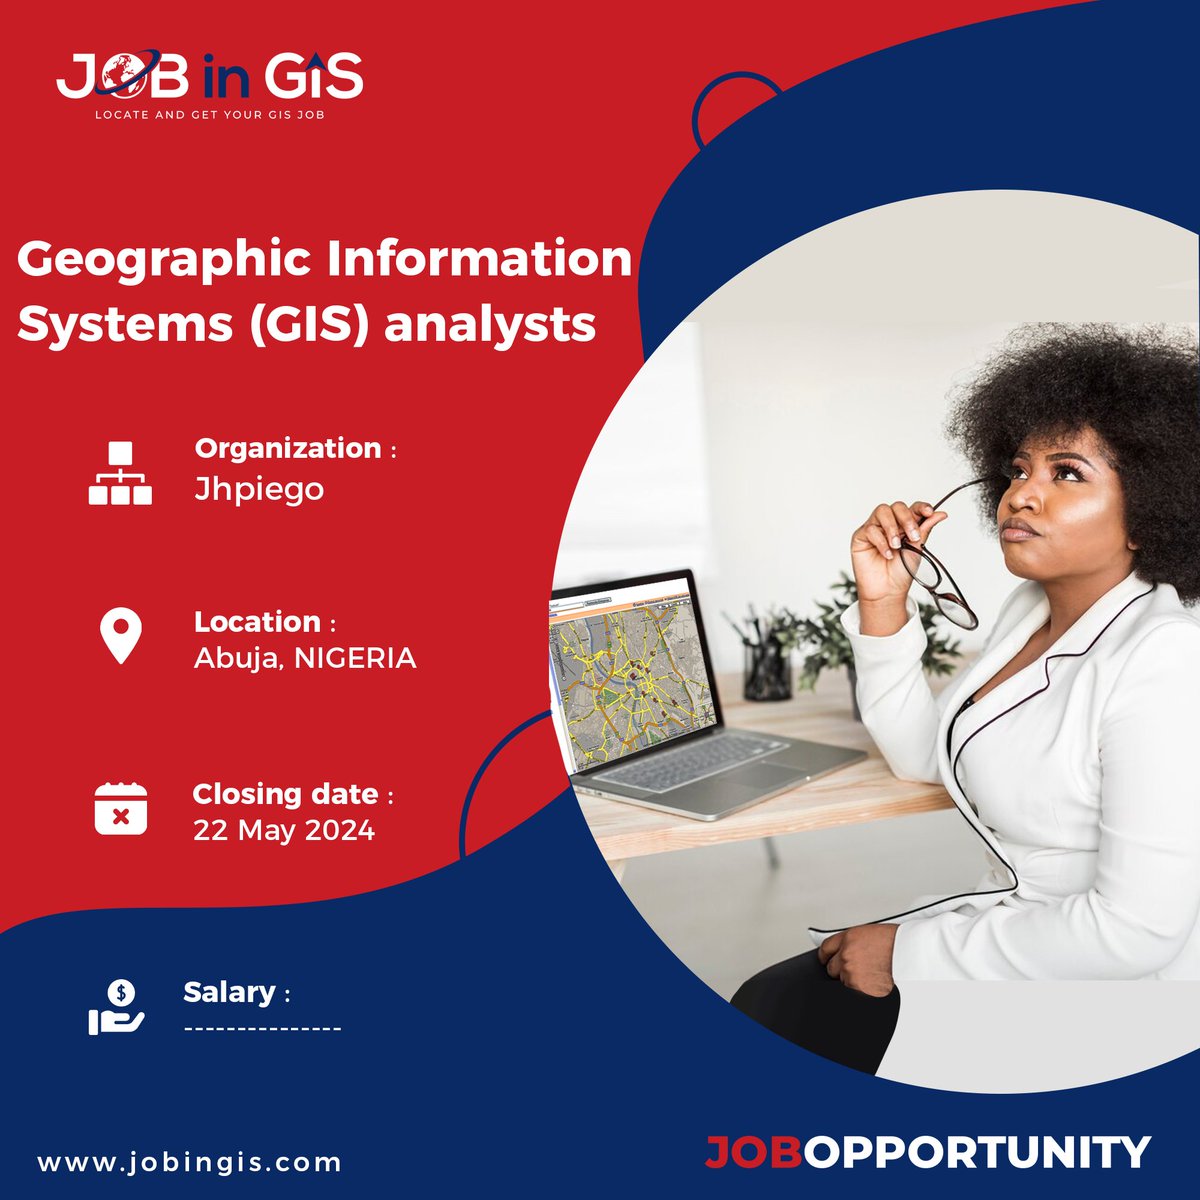 #jobingis : Jhpiego is hiring a Geographic information systems (GIS) analysts
📍 : #Abuja #Nigeria 

Apply here 👉 : jobingis.com/jobs/geographi…

#Jobs #mapping #GIS #geospatial #remotesensing #gisjobs #Geography #cartography